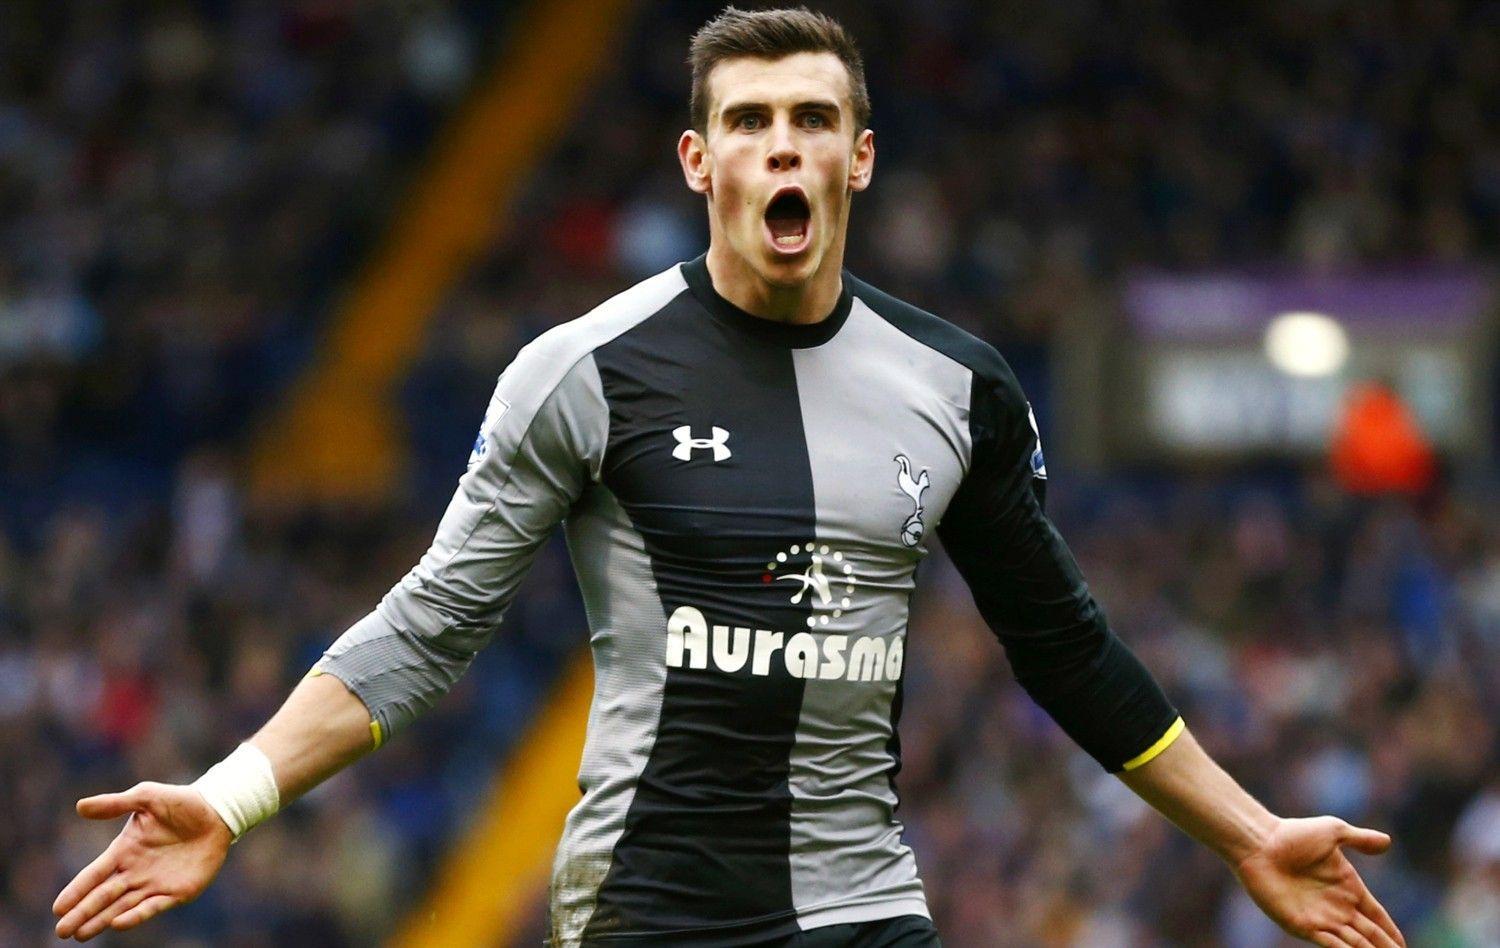 Gareth Bale HD Wallpaper. All Kinds of Sports Wallpaper Collection